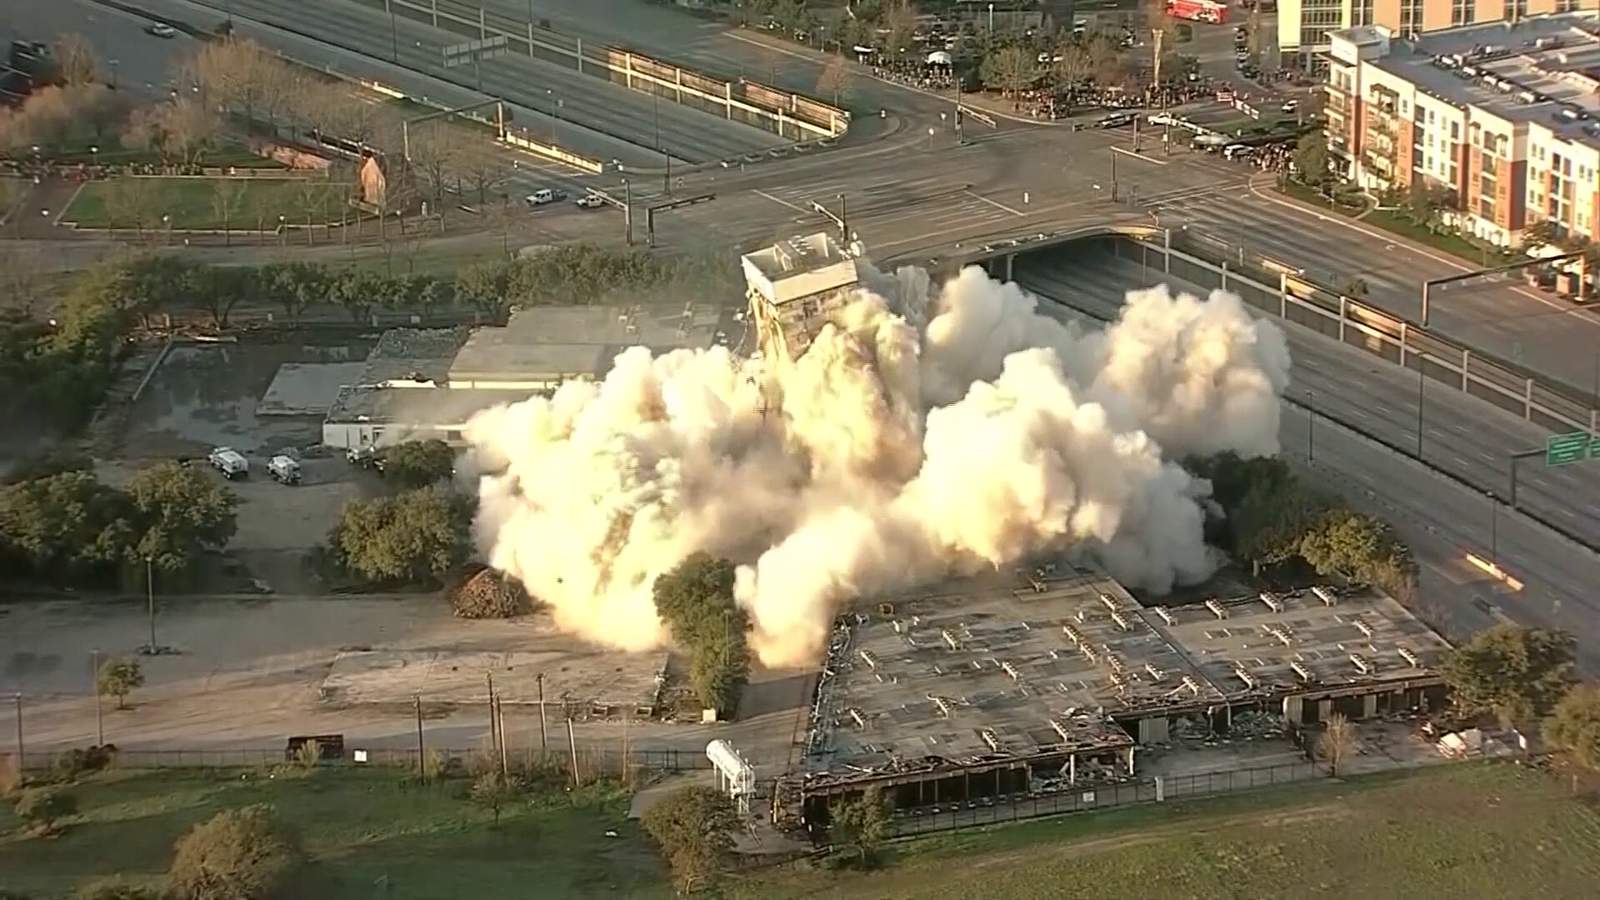 ‘Leaning Tower of Dallas’ is online star after implosion